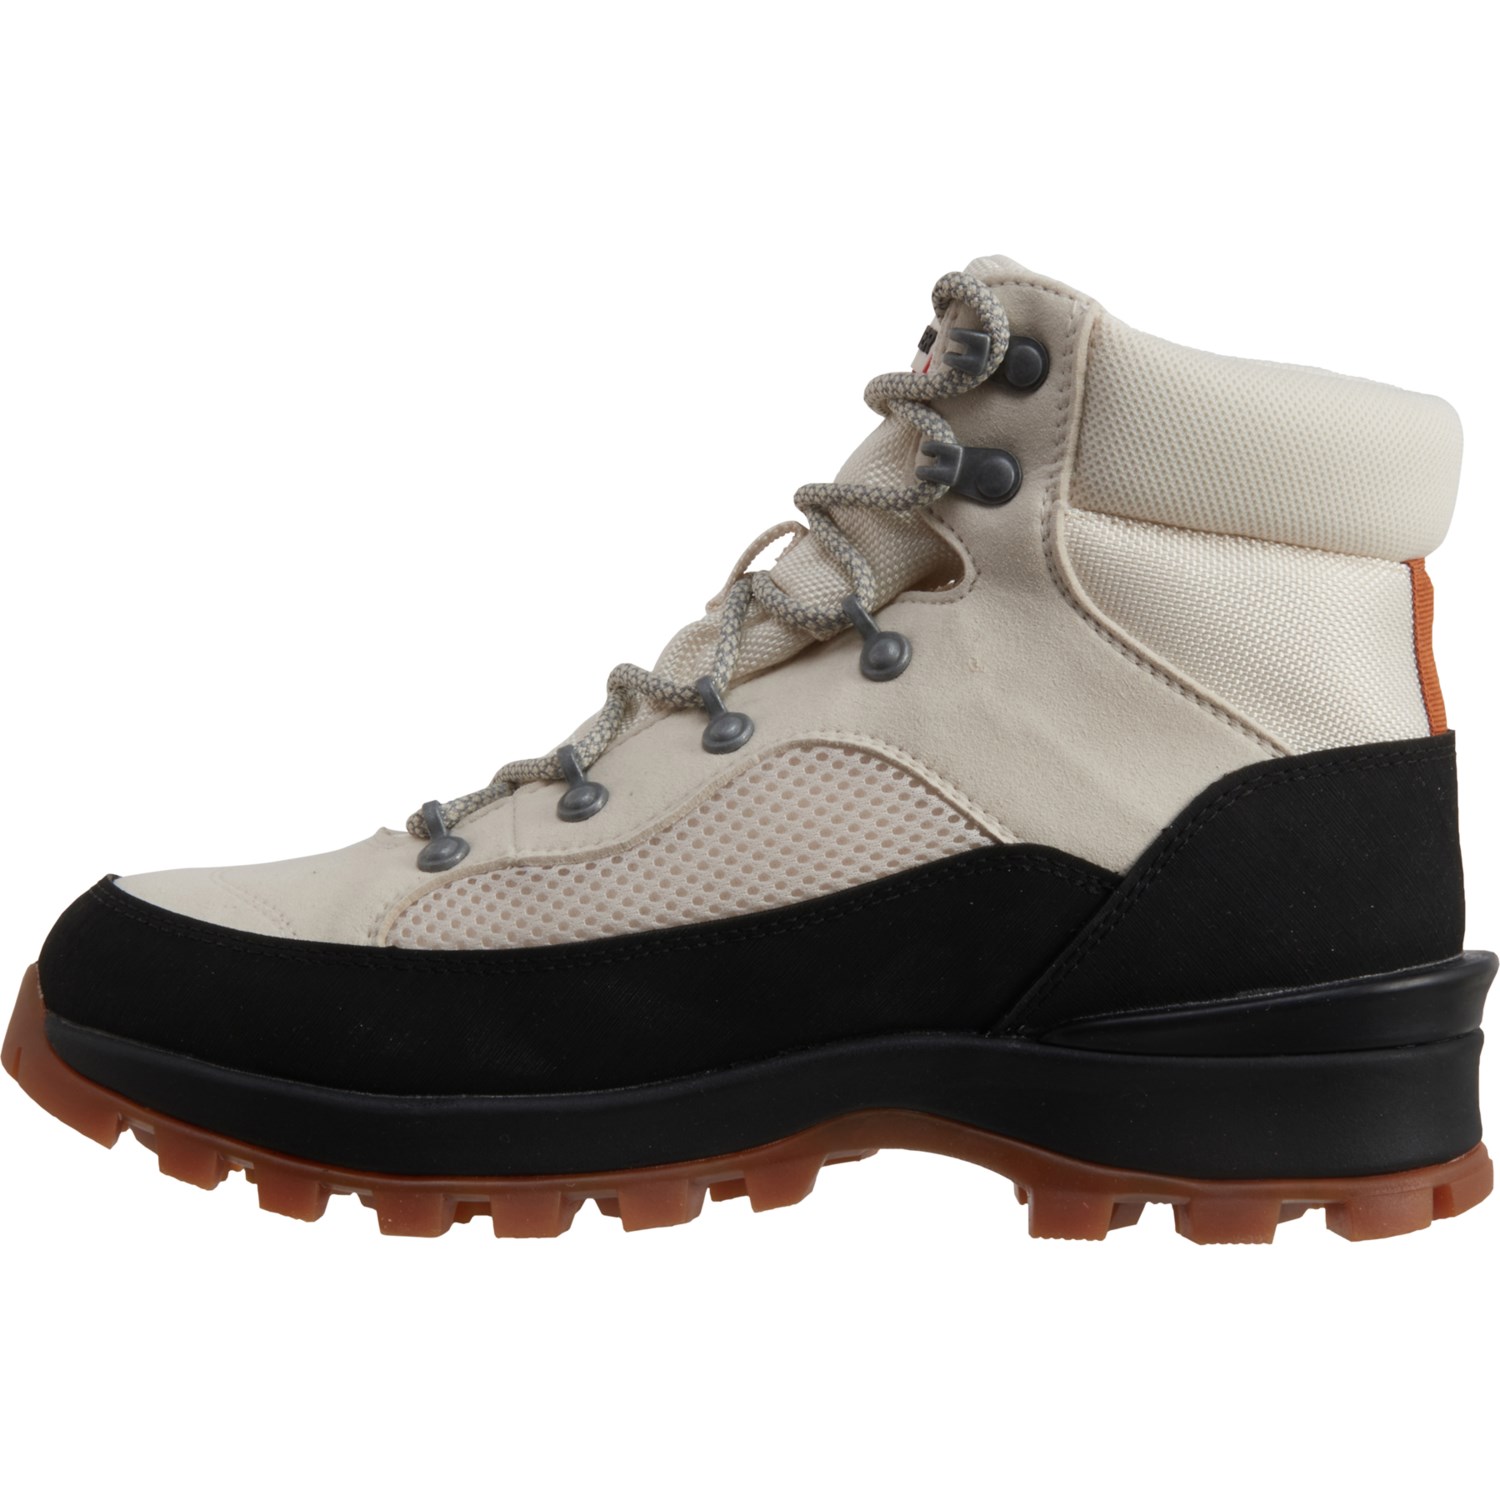 HUNTER Explorer Mid Lace-Up Hiking Boots (For Women) - Save 33%